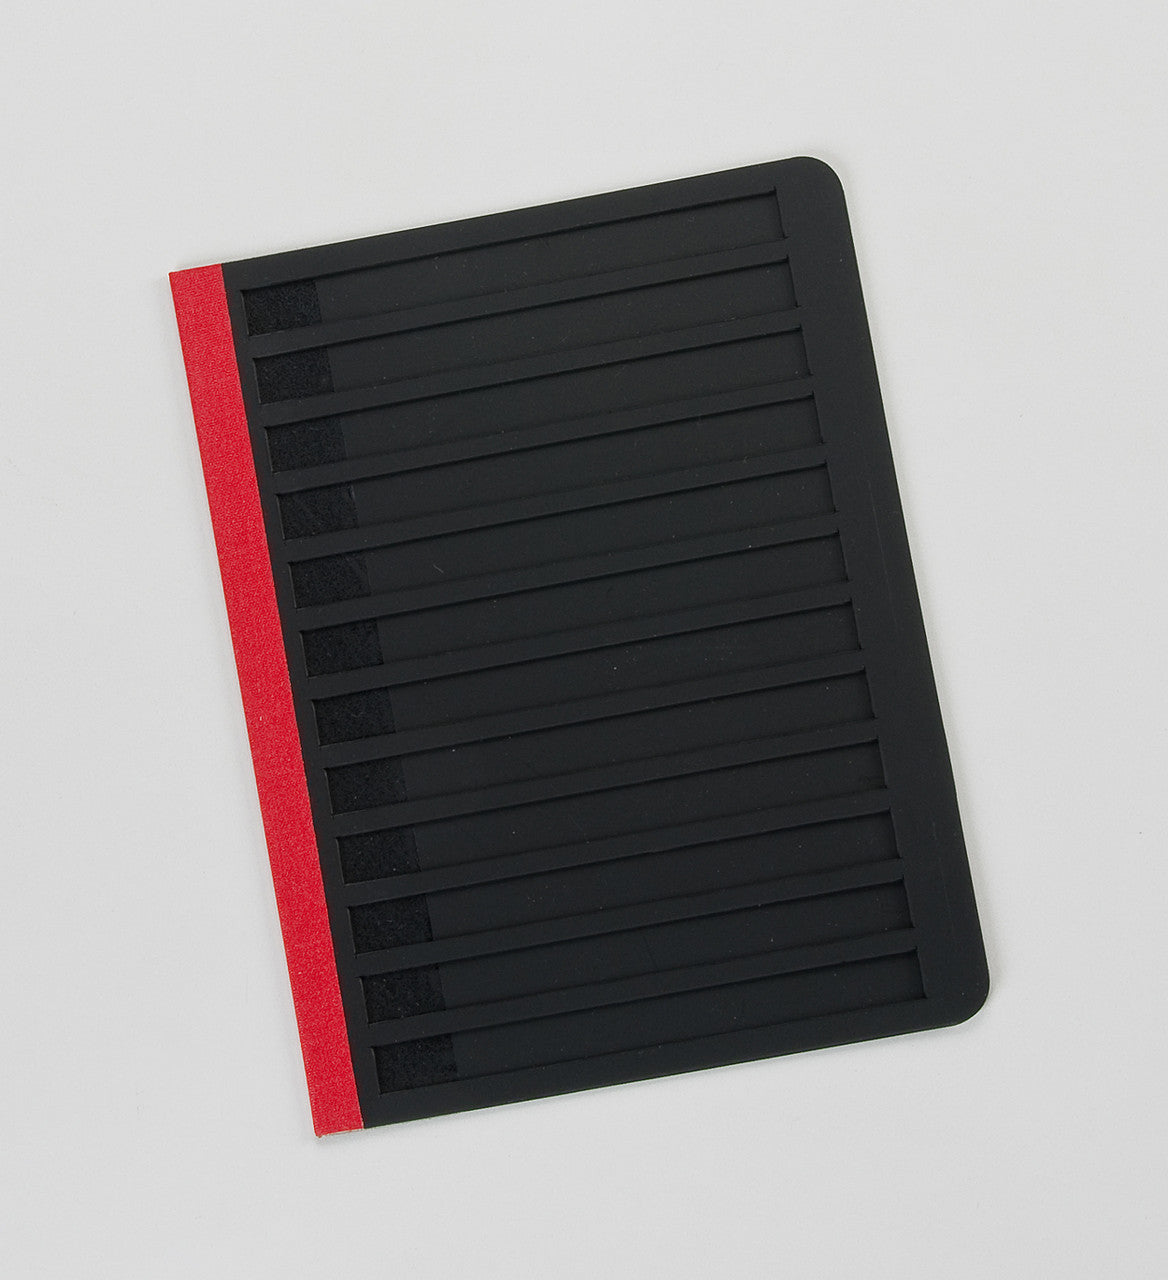 A black letter guide with a black background and red tape on the side for hinged opening.